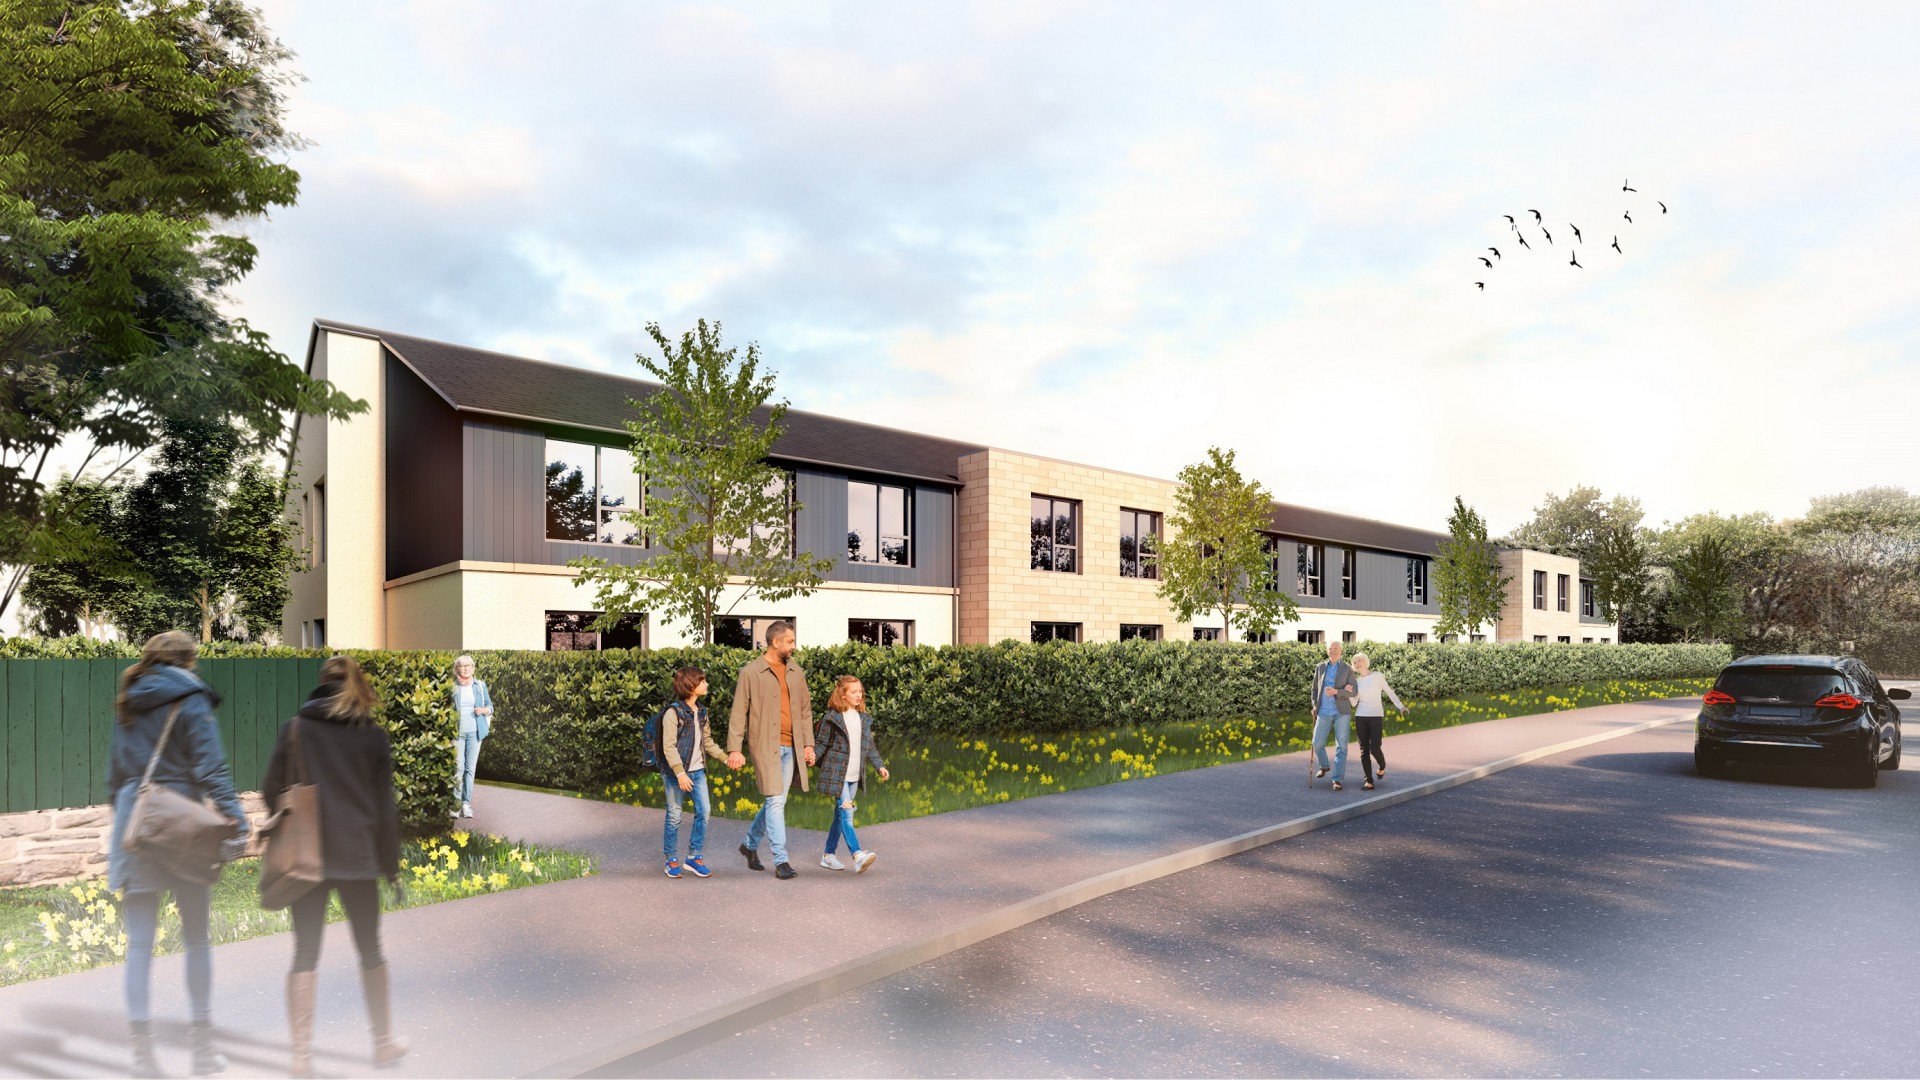 Stirling care home moves on-site : October 2020 : News : Architecture ...